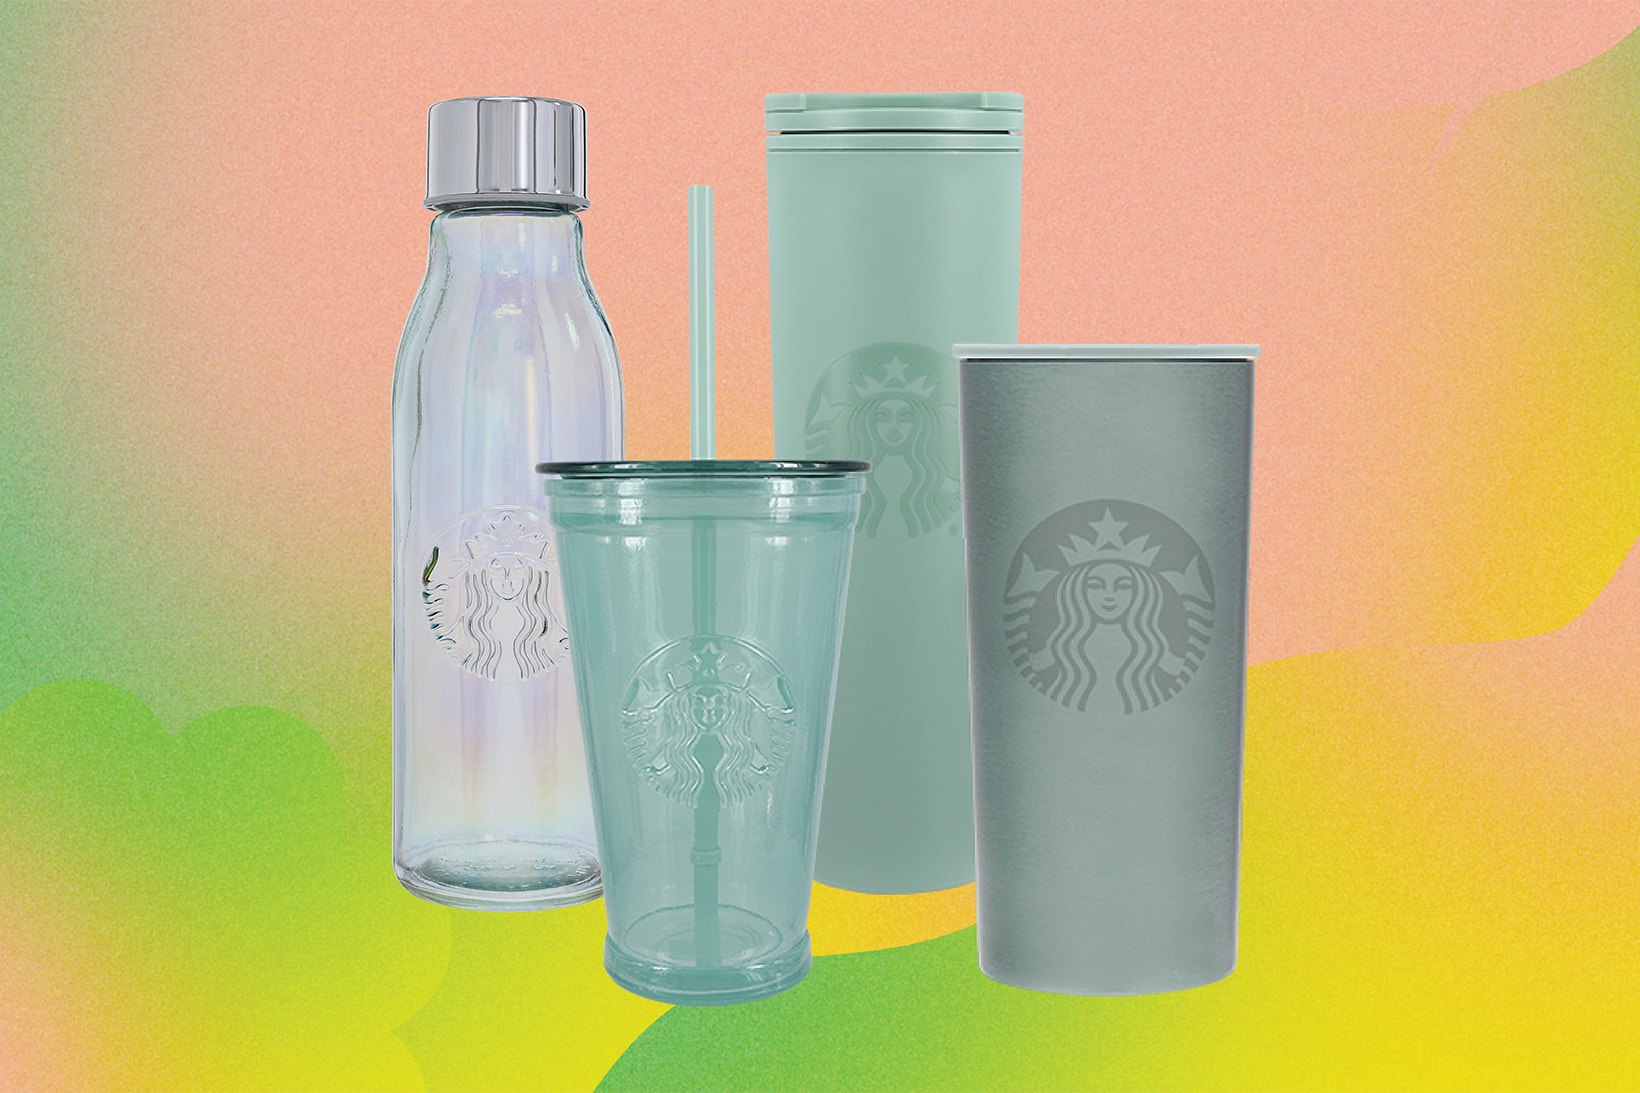 https://image-cdn.hypb.st/https%3A%2F%2Fhypebeast.com%2Fwp-content%2Fblogs.dir%2F6%2Ffiles%2F2021%2F04%2Fstarbucks-earth-month-merchandise-tumblers-glass-water-bottle-cup-sustainable-reusable-tote-bag-release-1.jpg?cbr=1&q=90